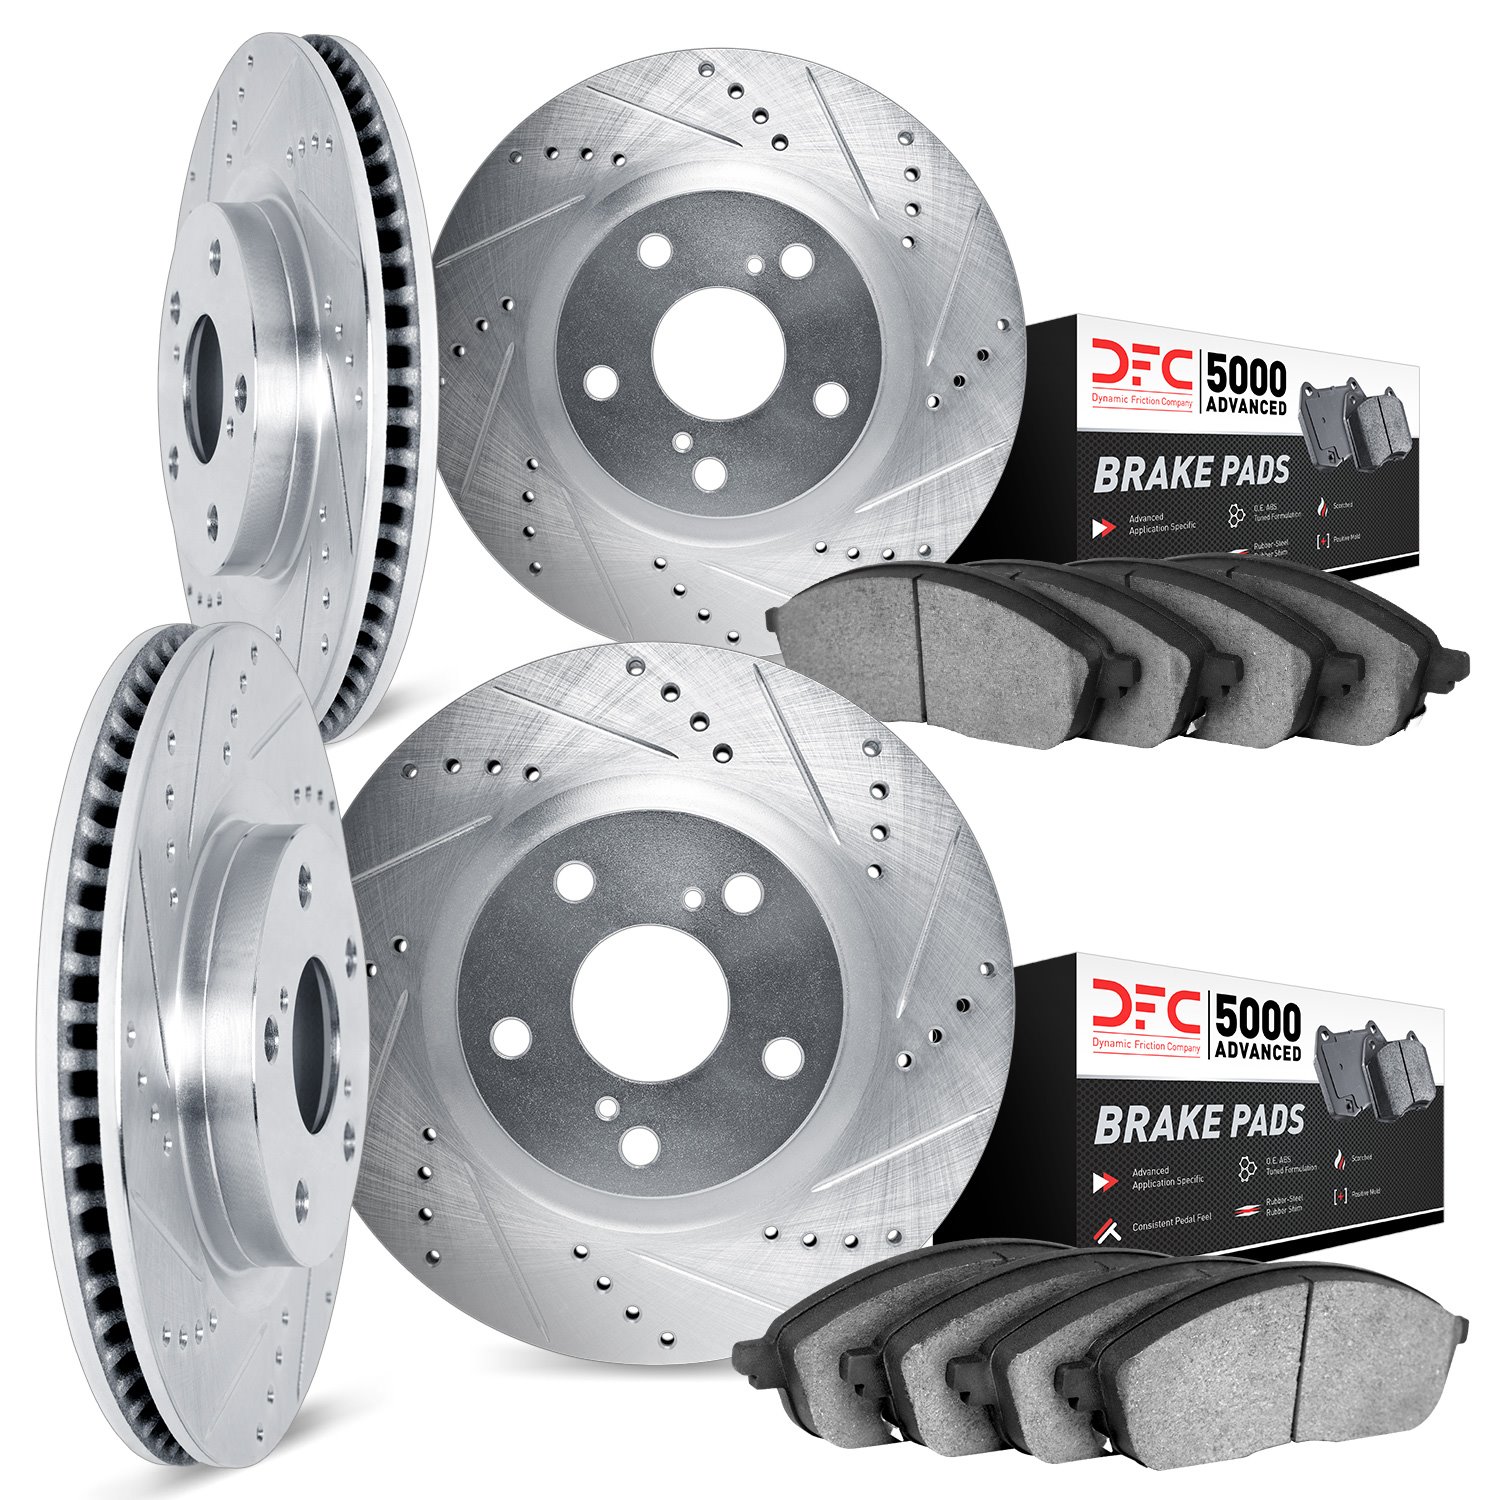 7504-68002 Drilled/Slotted Brake Rotors w/5000 Advanced Brake Pads Kit [Silver], 1993-1997 Infiniti/Nissan, Position: Front and